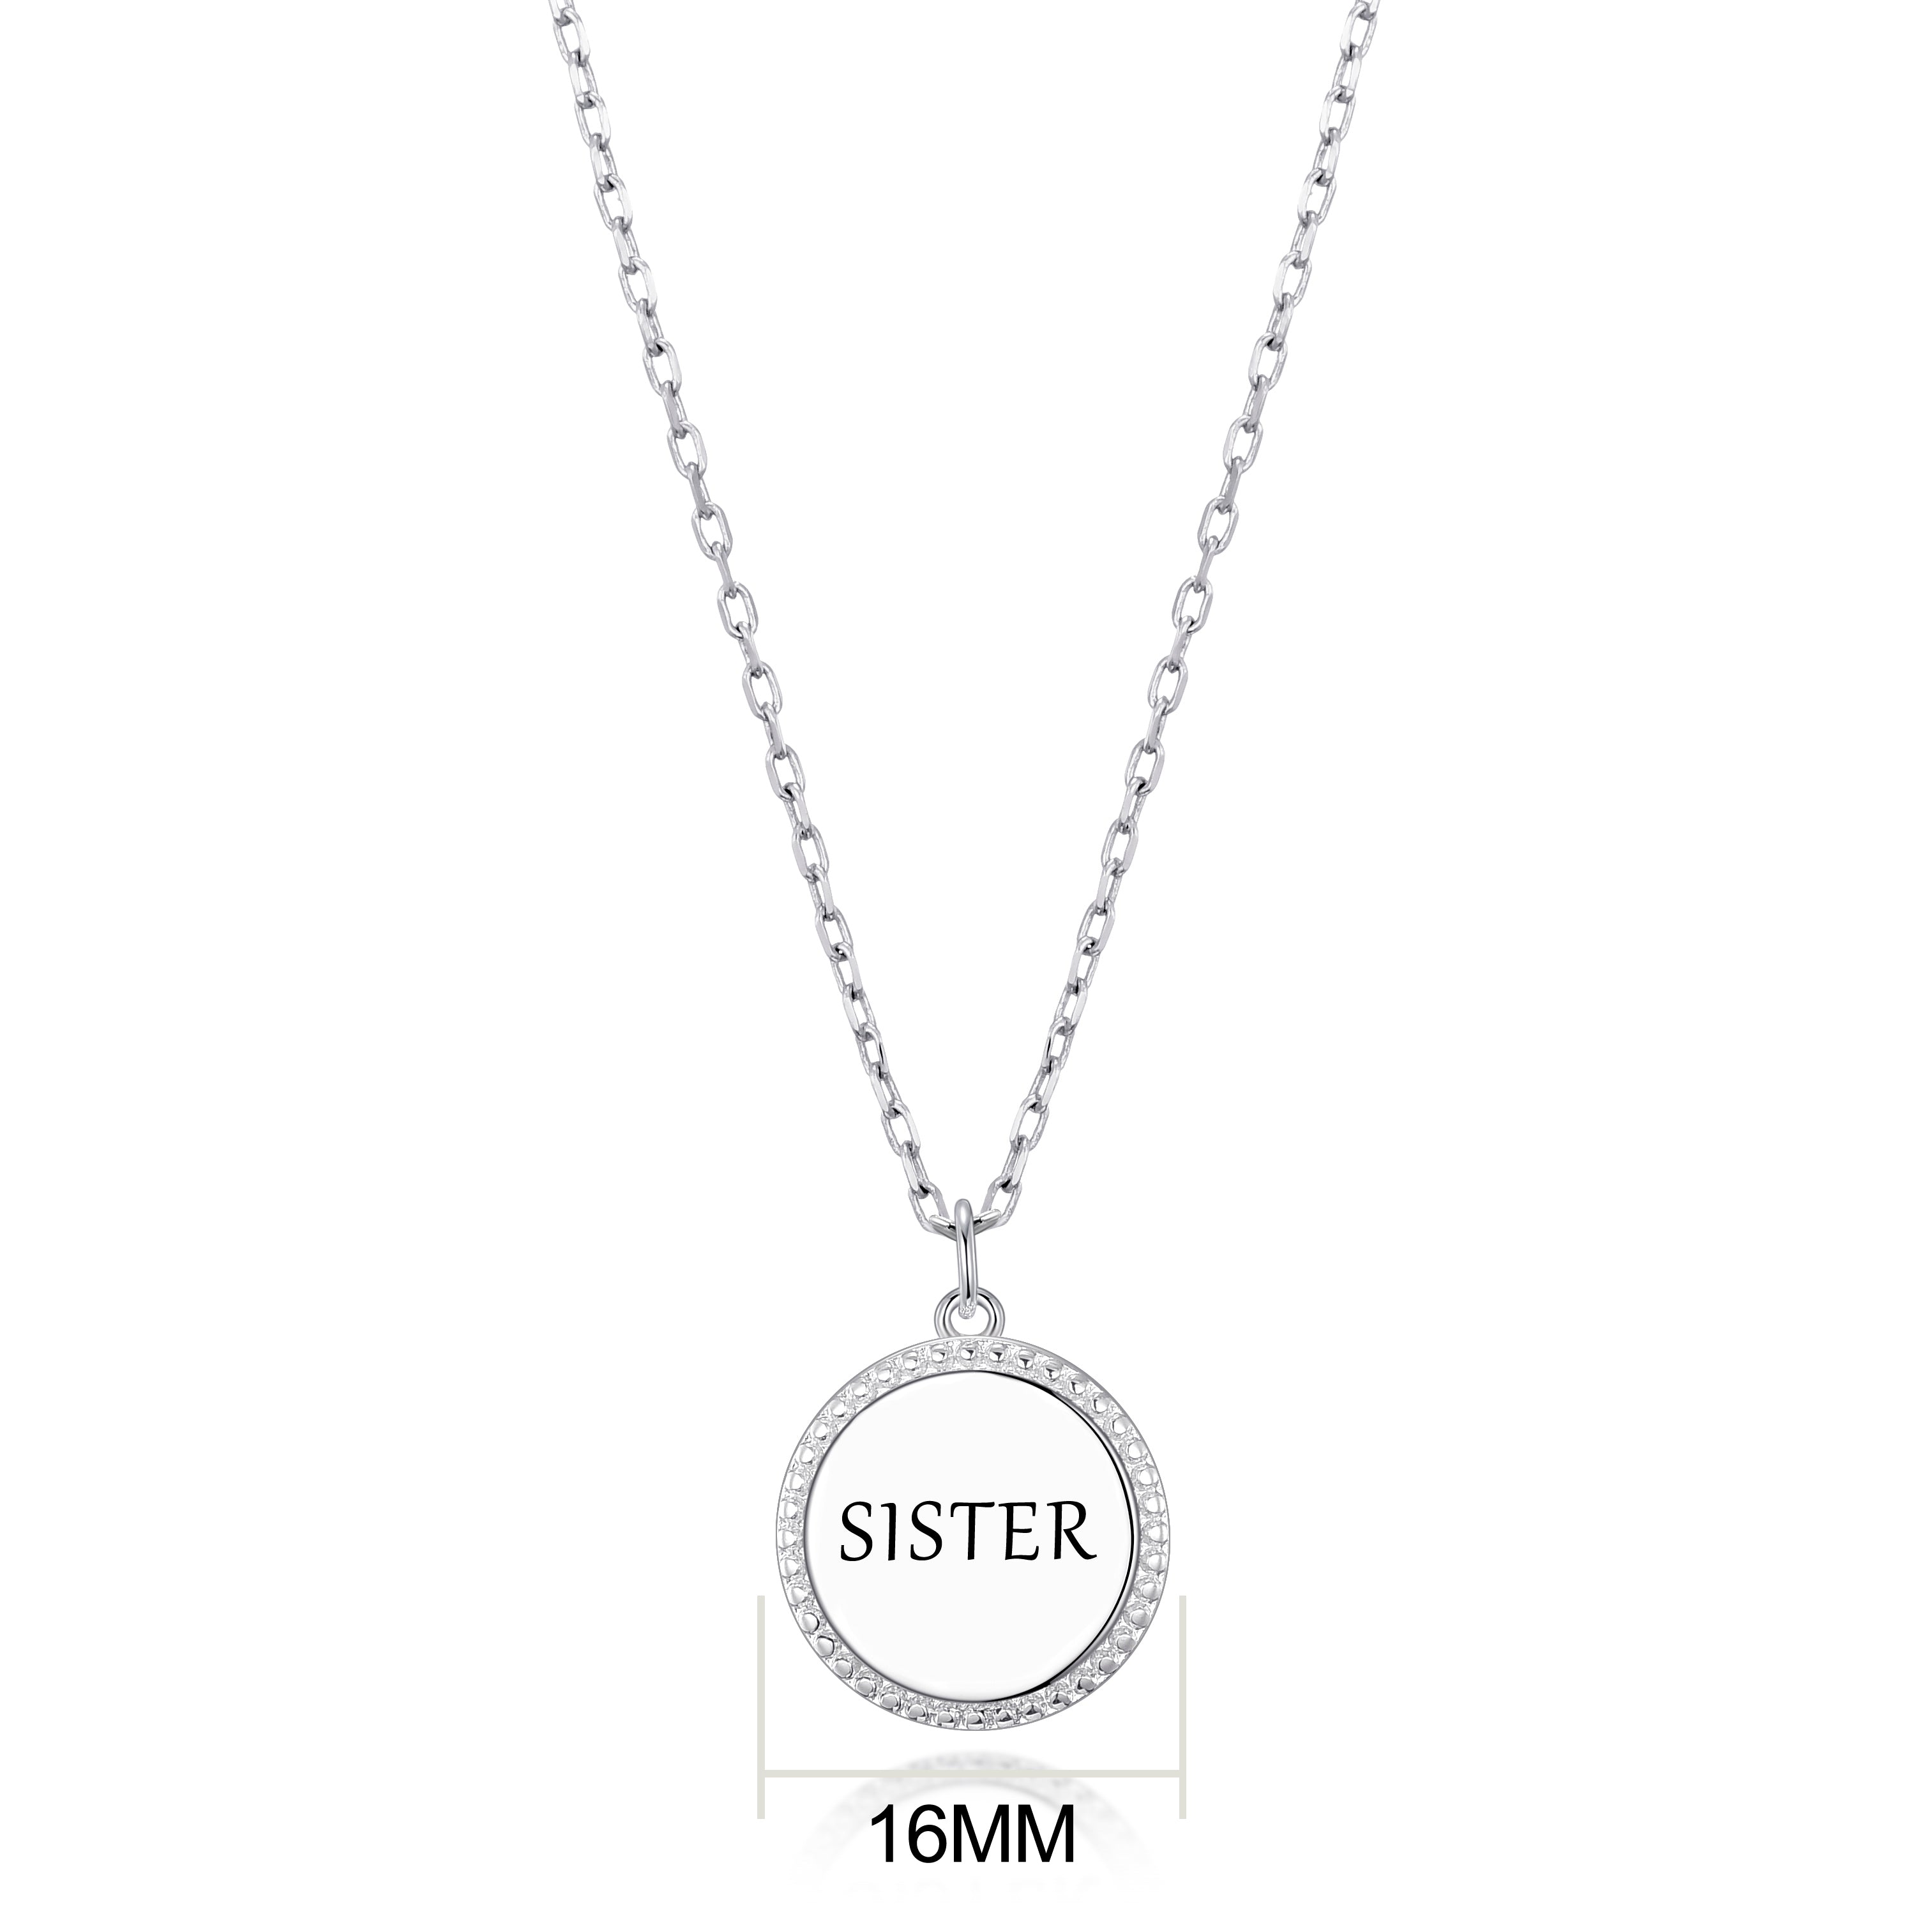 Silver Plated Filigree Disc Sister Necklace